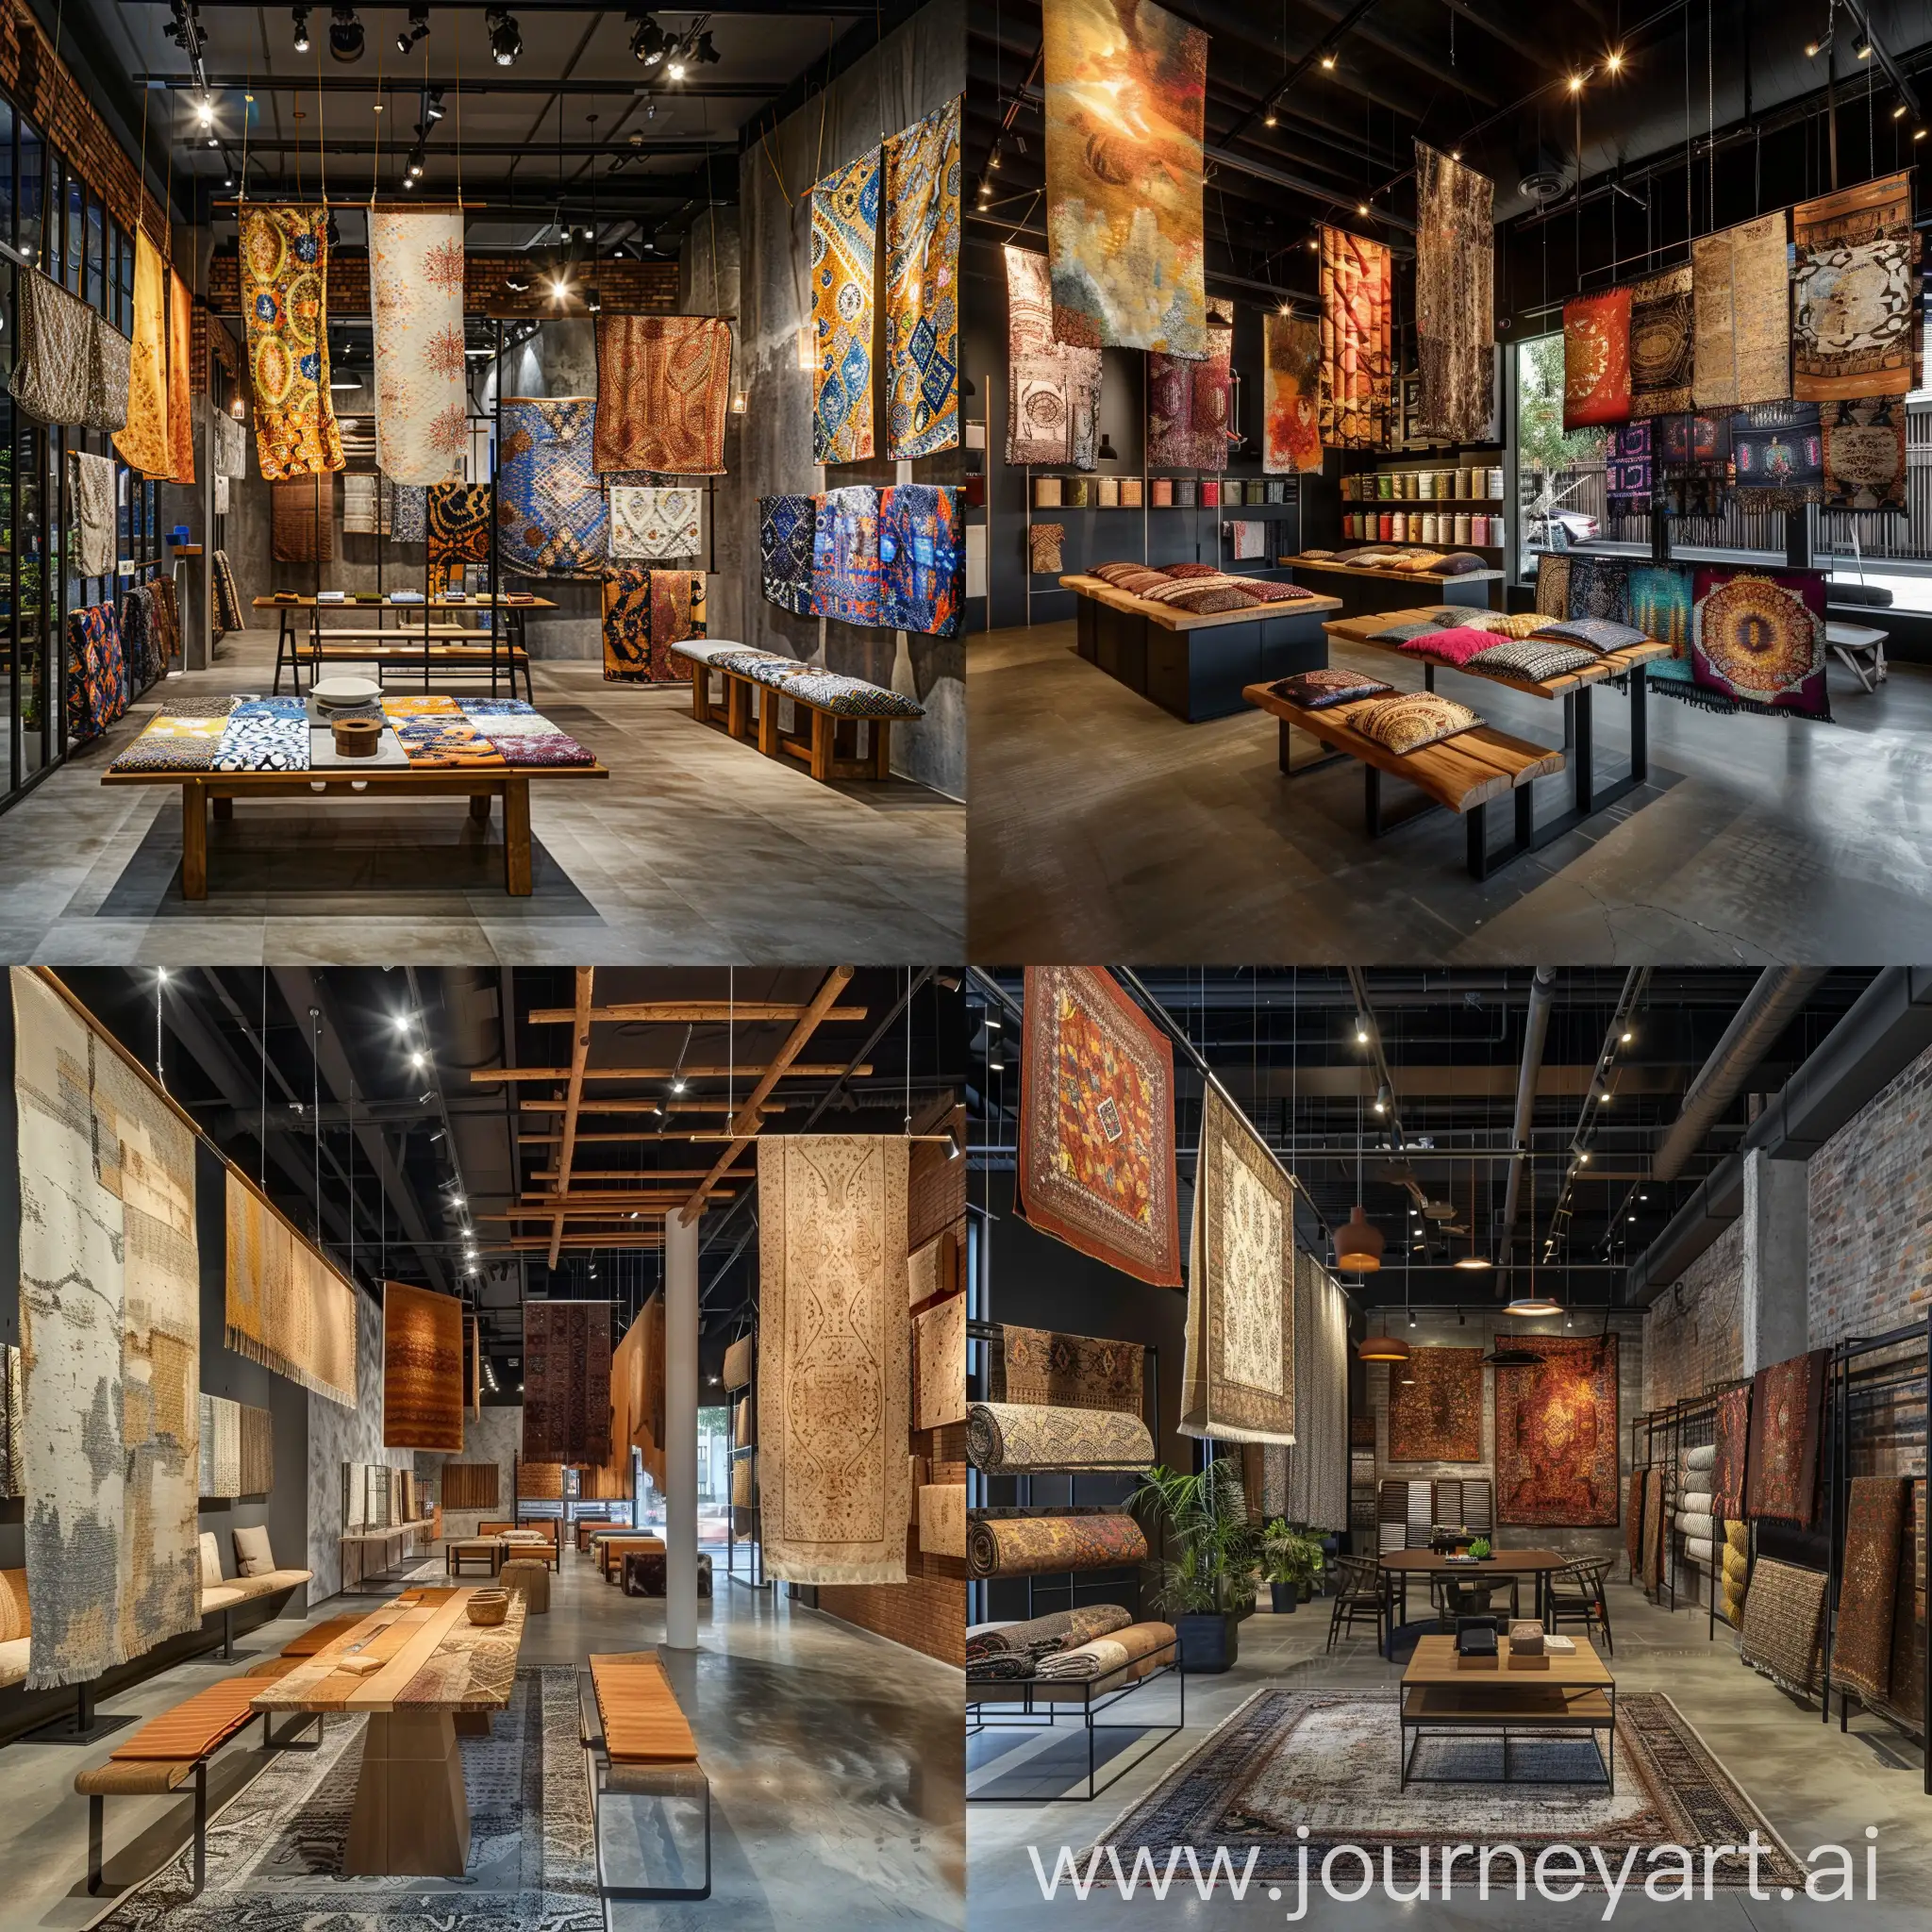 Fabric showroom with industrial and cultural concept, with hanging display, table display, seating area, wall and floor design element, lighting ideas associated within the space, ceiling design element.